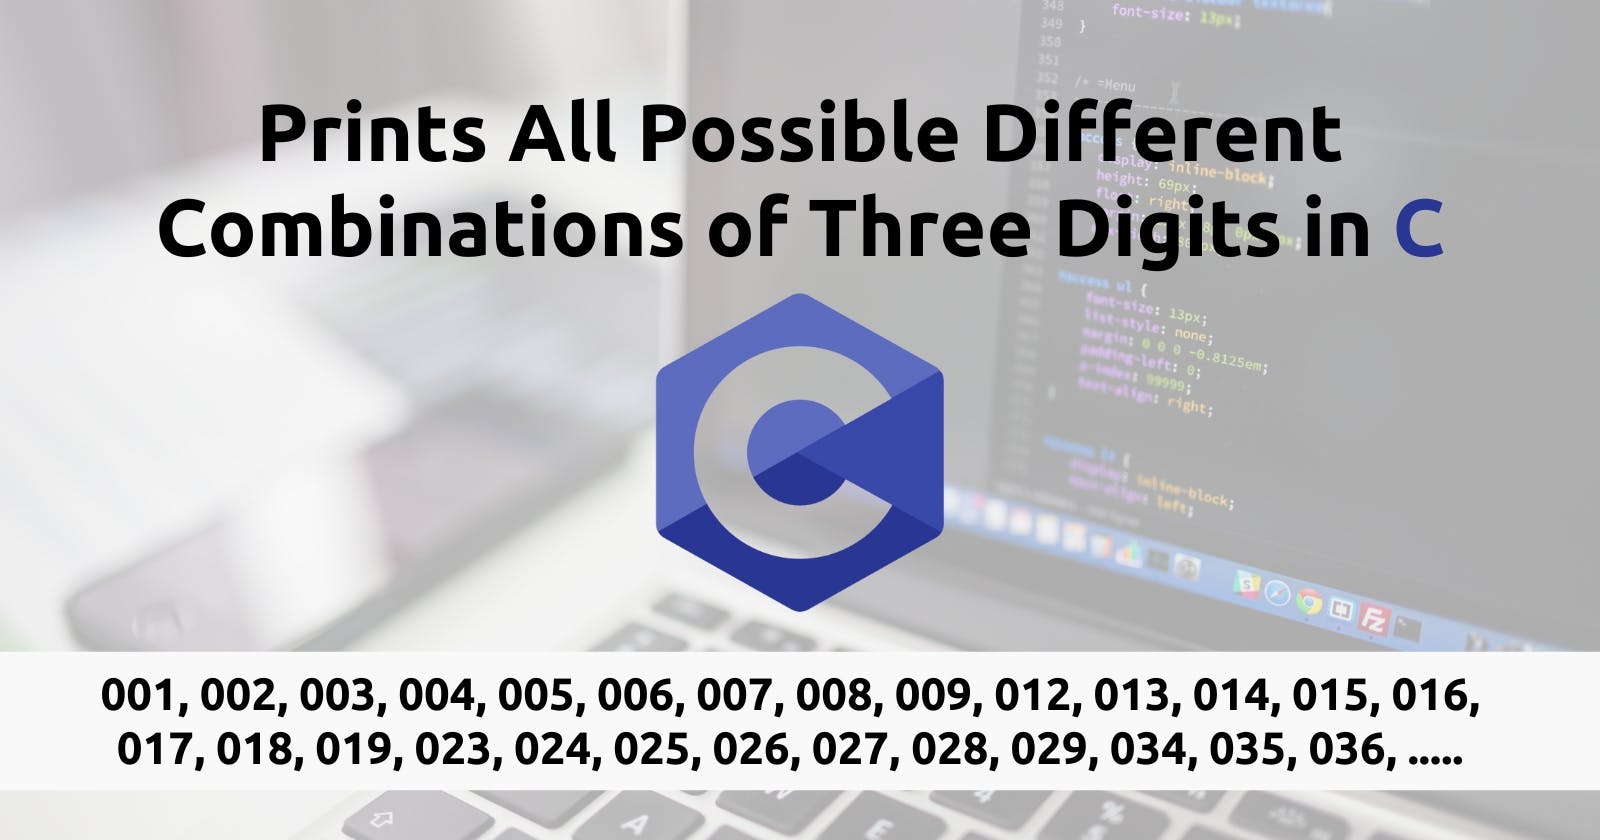 How to Write a Program That Prints All Possible Different Combinations of Three Digits in C